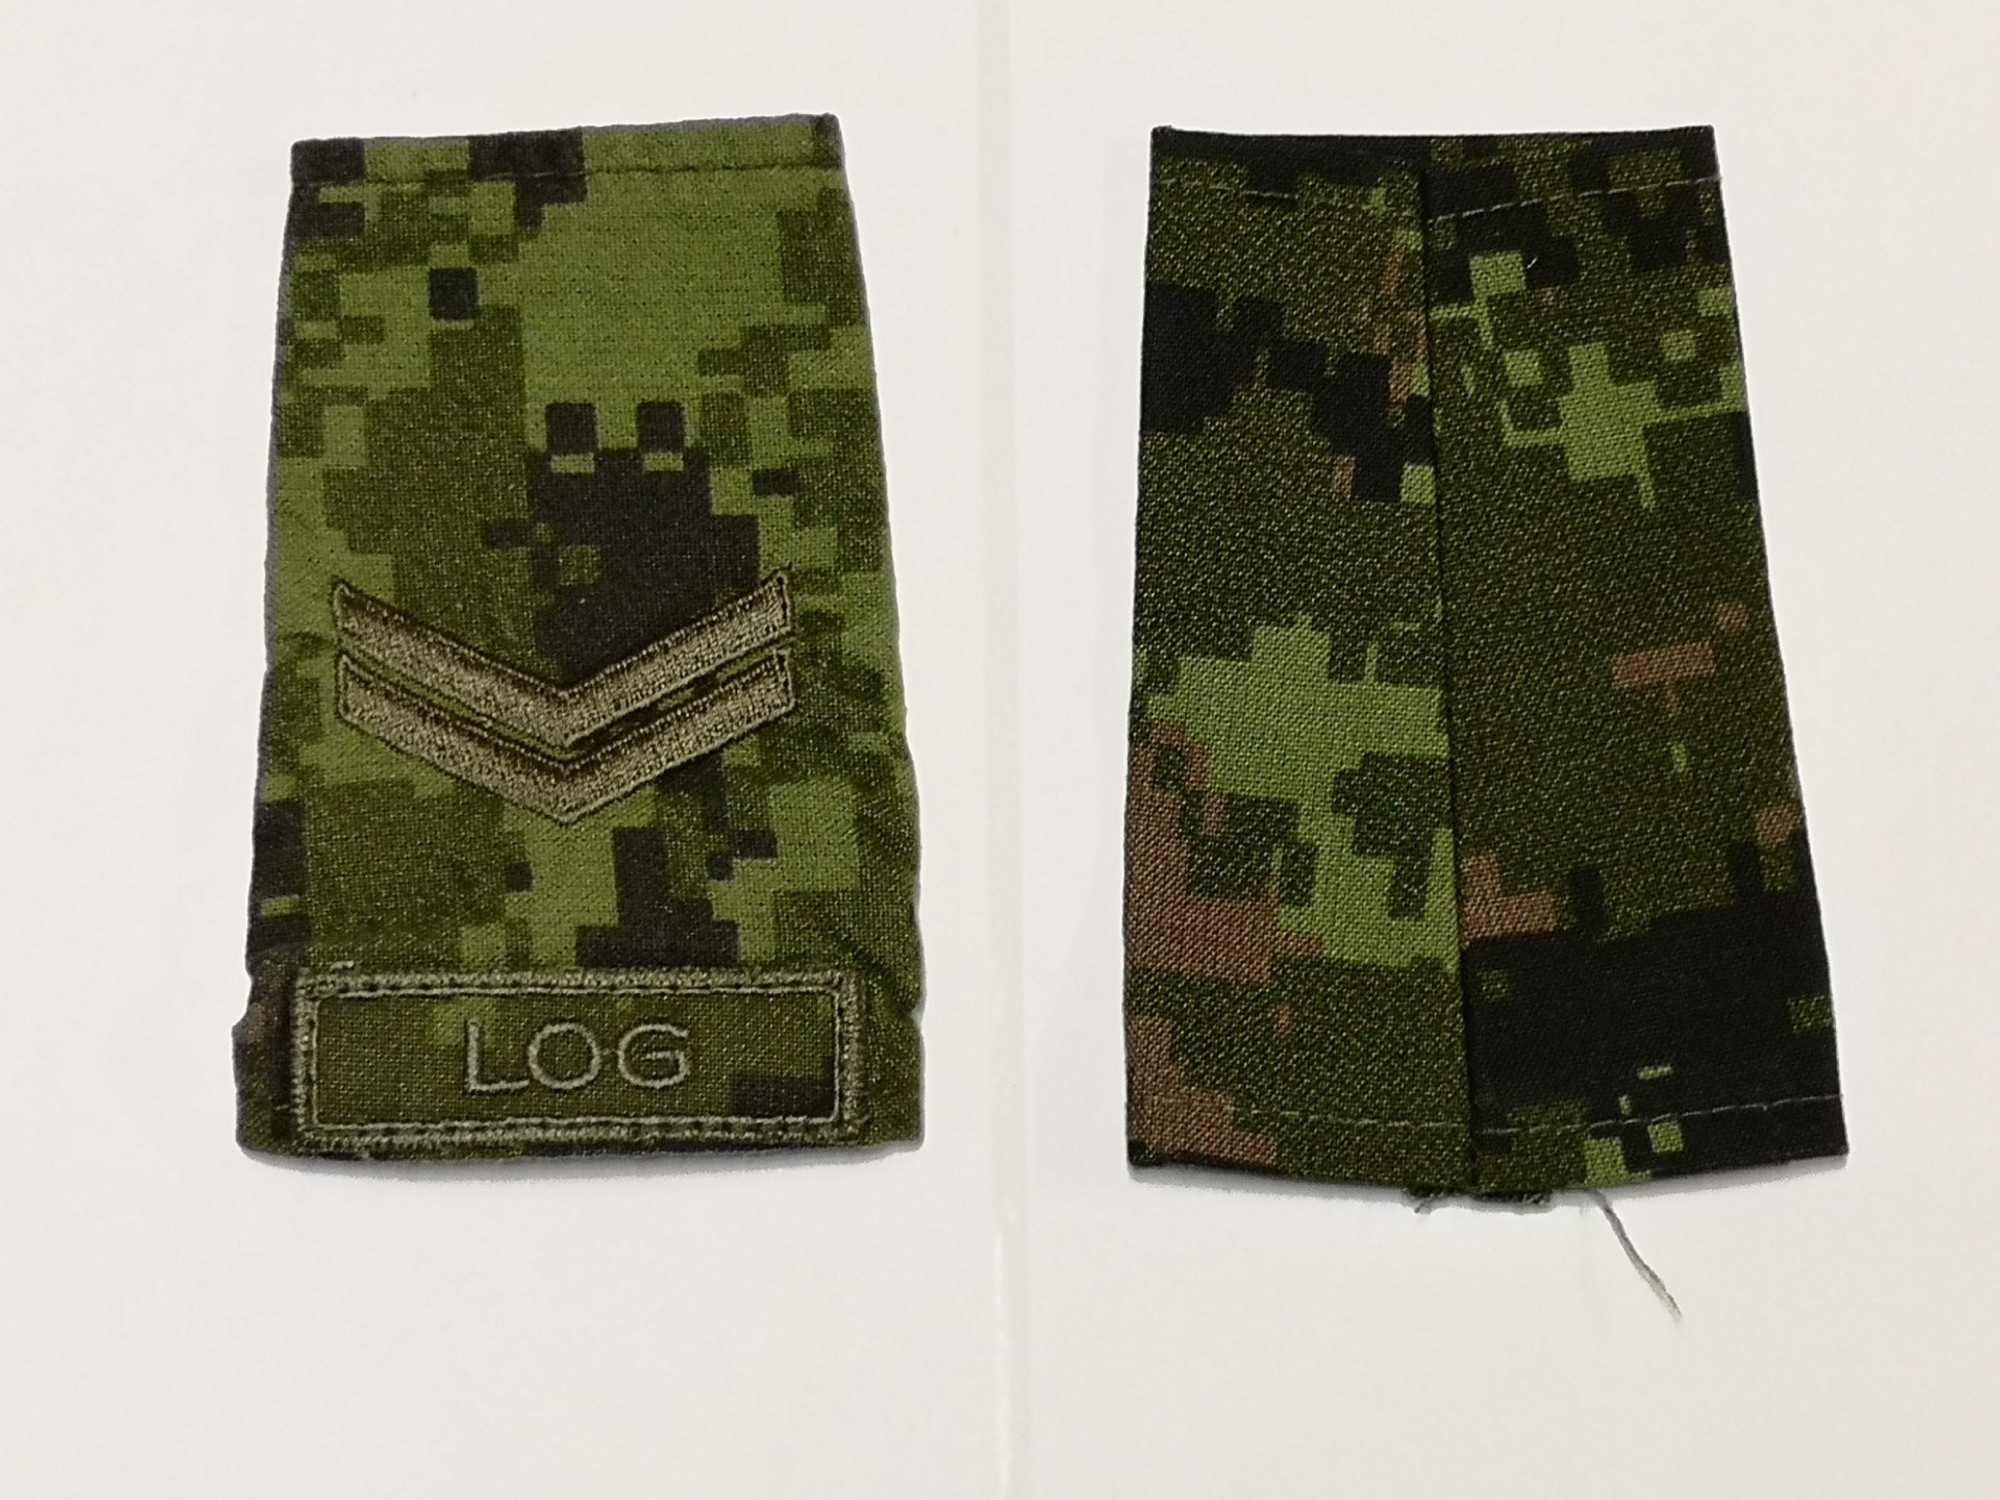 Canadian Armed Forces Cadpat Rank Epaulets LOG - Corporal